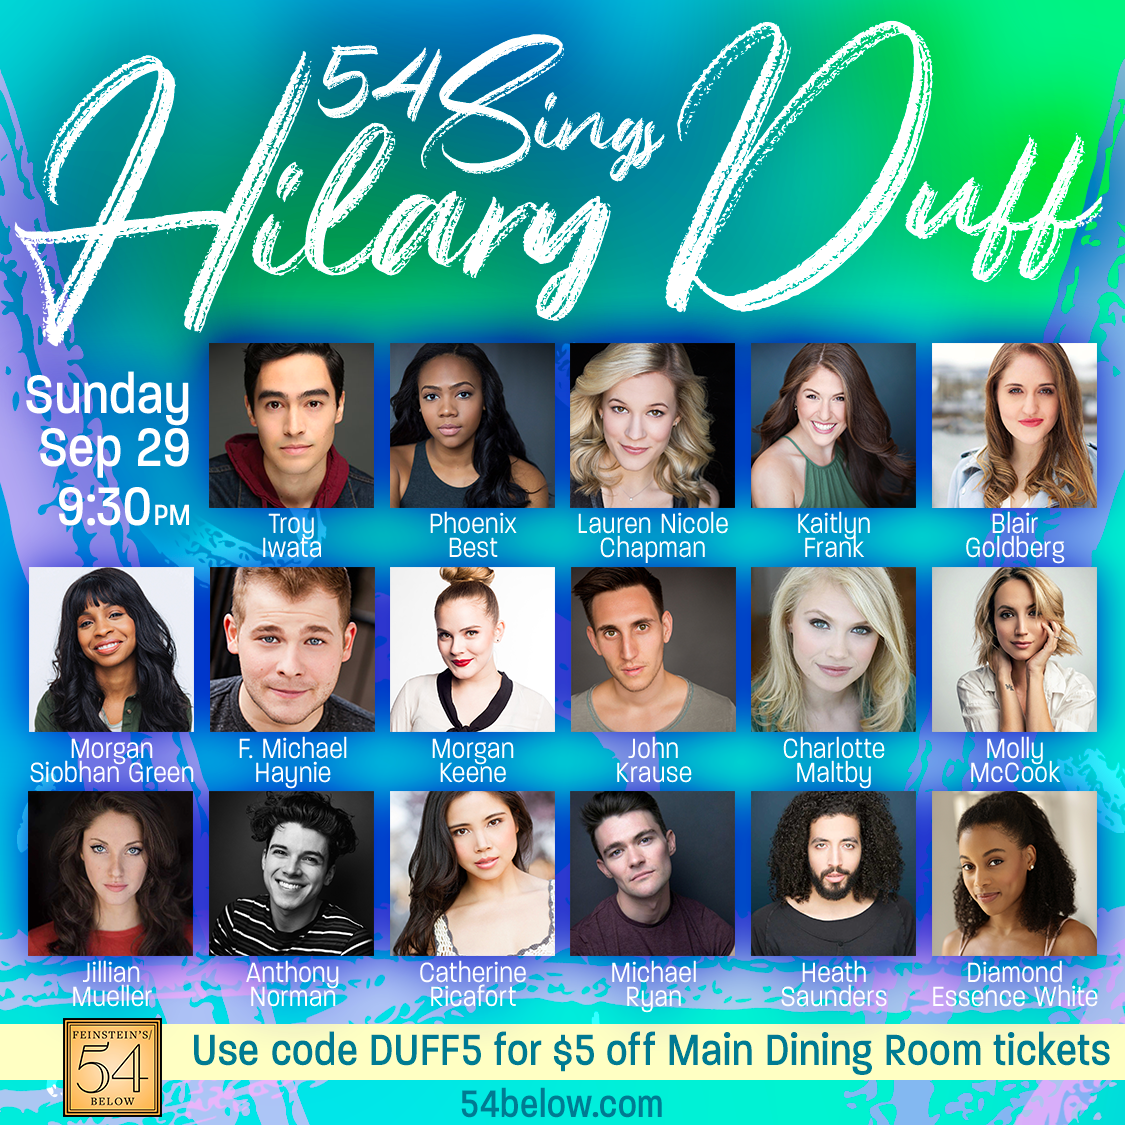 Morgan Siobhan Green, Troy Iwata And More Will Sing Hilary Duff At Feinstein's/54 Below 